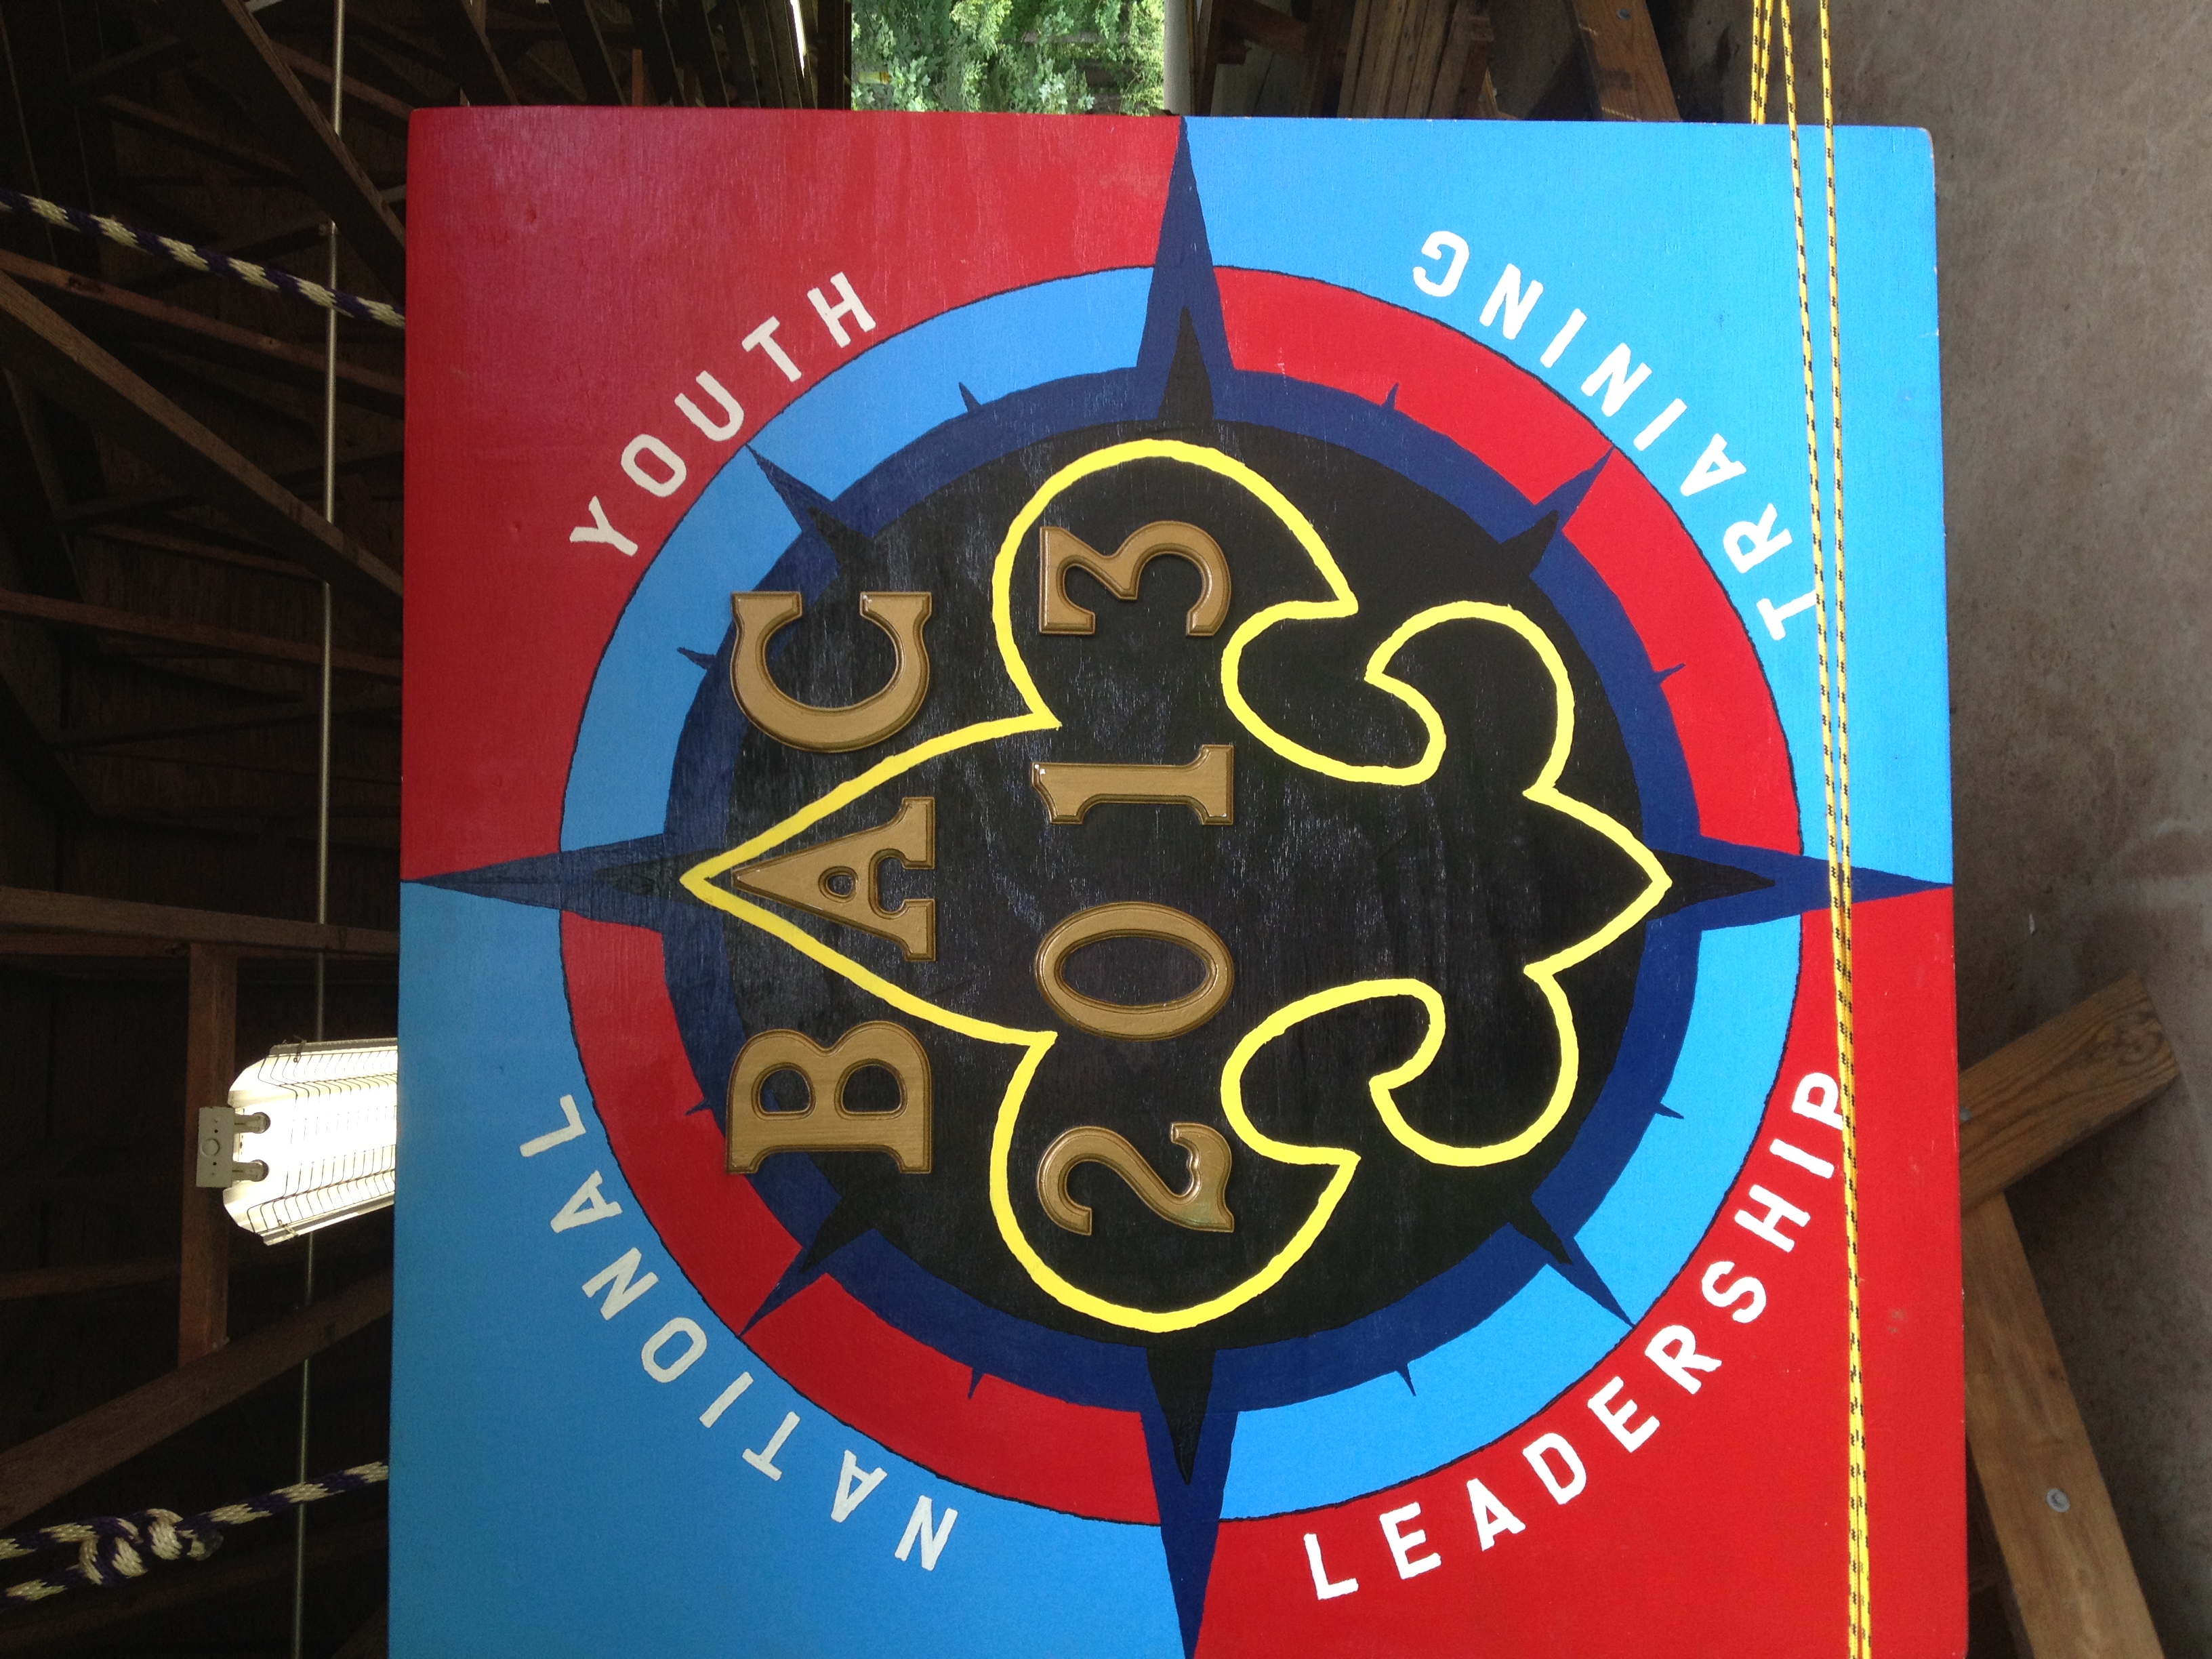 12 Life Lessons That Every Boy Scout Has Learned - BSA Troop 883